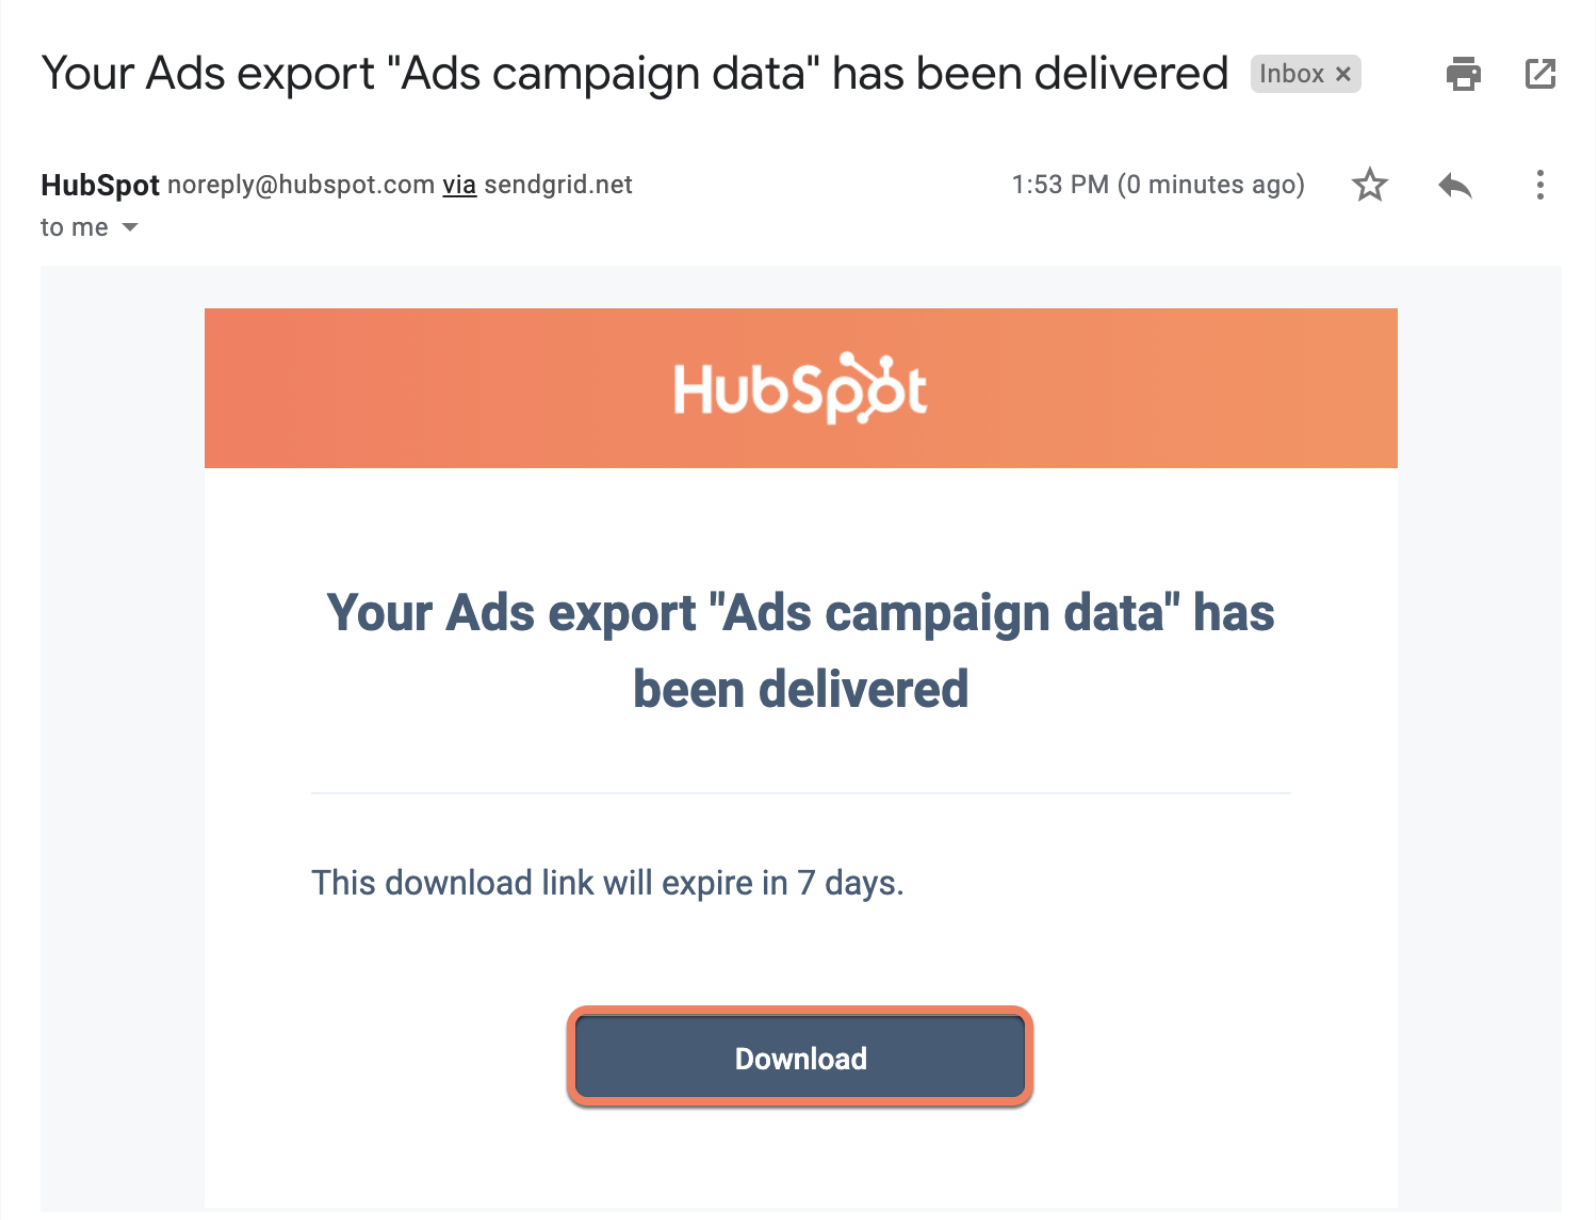 Ads export data confirmation email